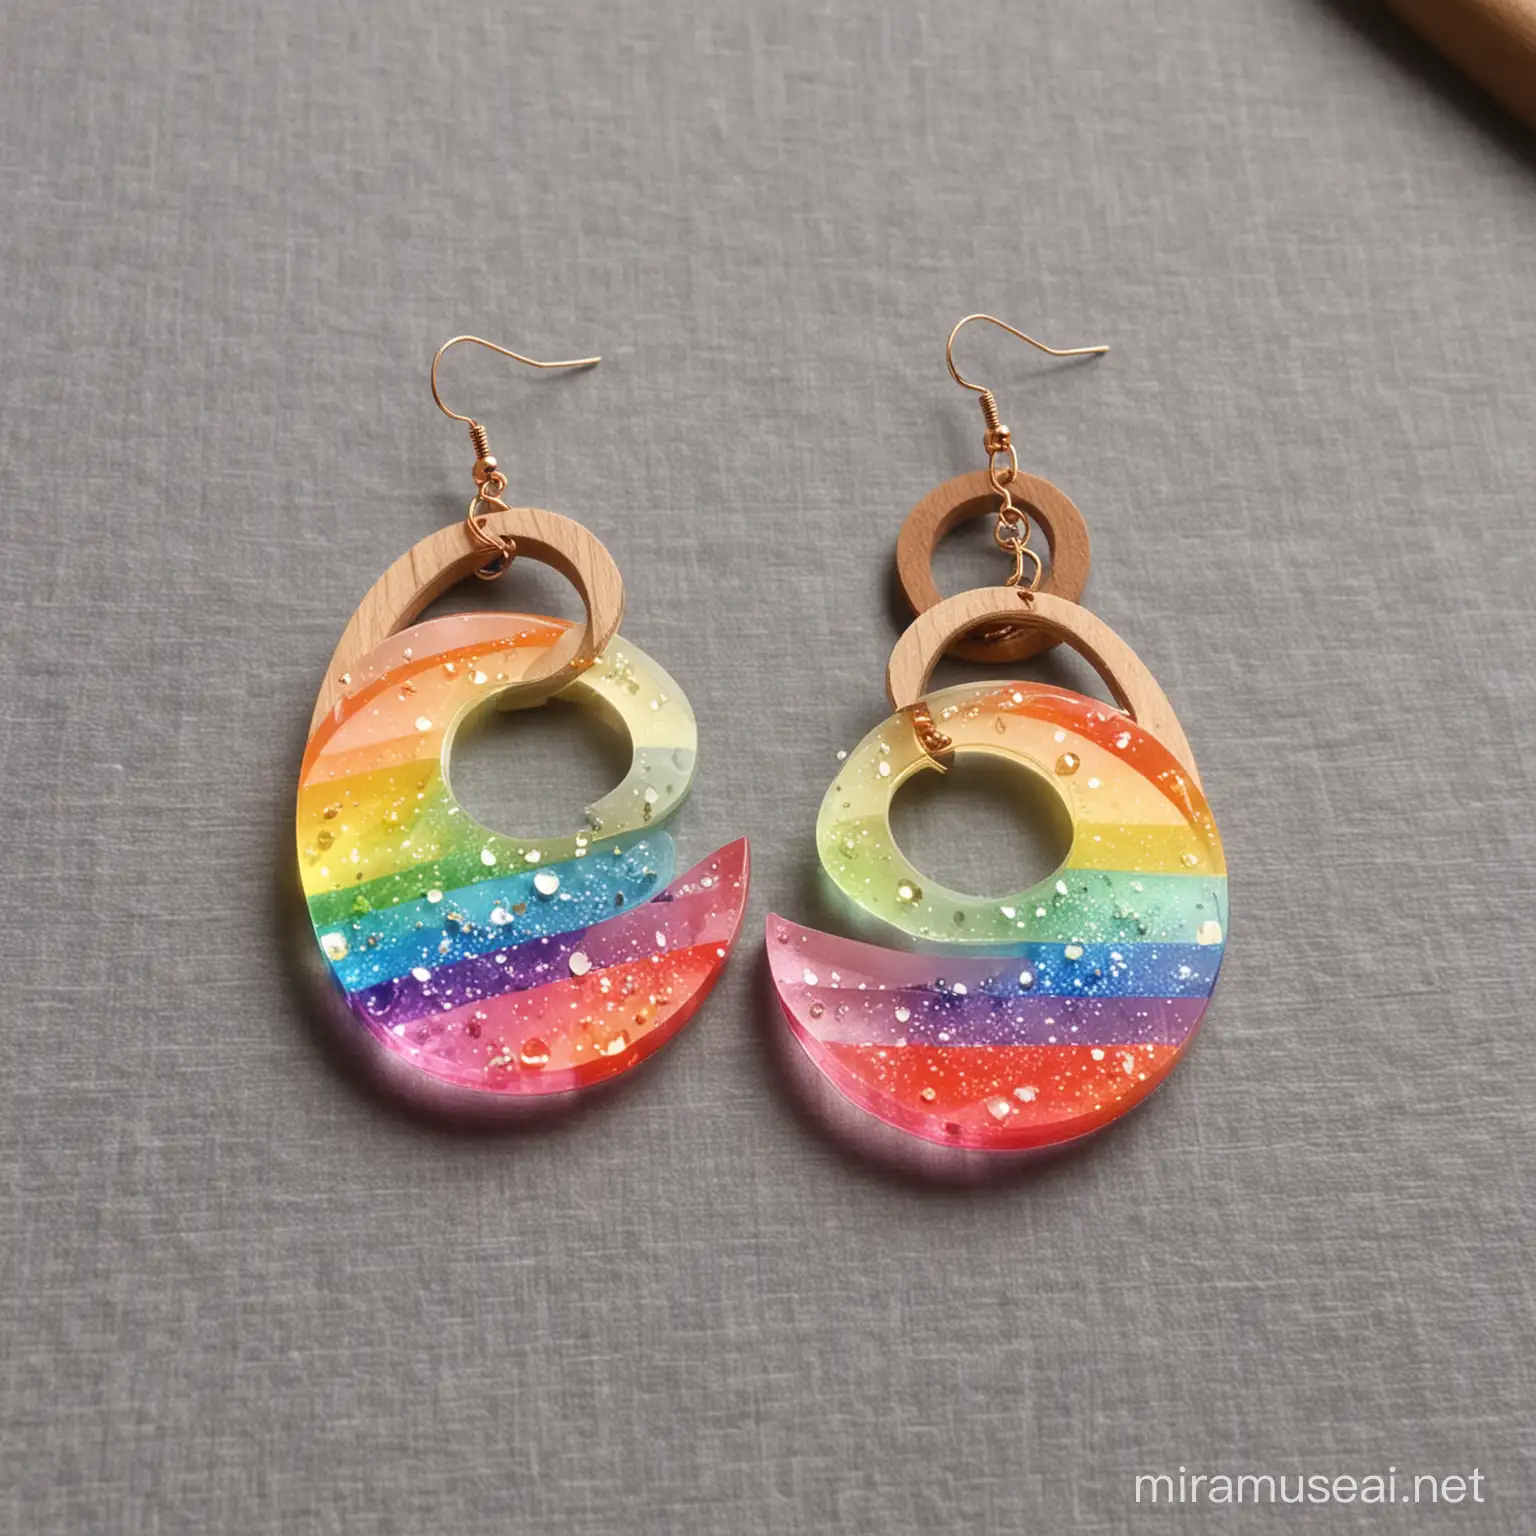 Handcrafted Resin Earrings Wooden and Rainbow Accents